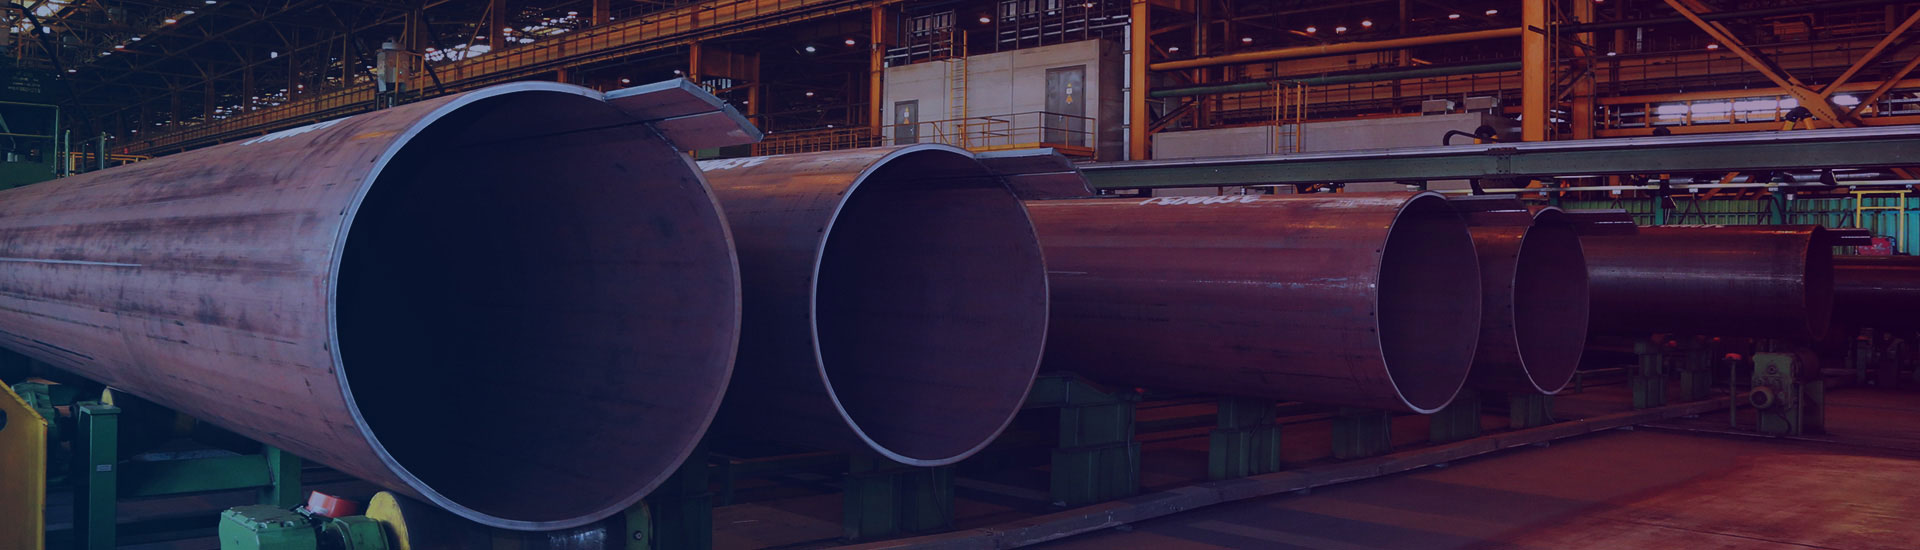 chinese producer of Seamless Steel Pipe,Carbon Steel Pipe,Stainless Steel pipe,Alloy steel pipe,OCTG Pipe